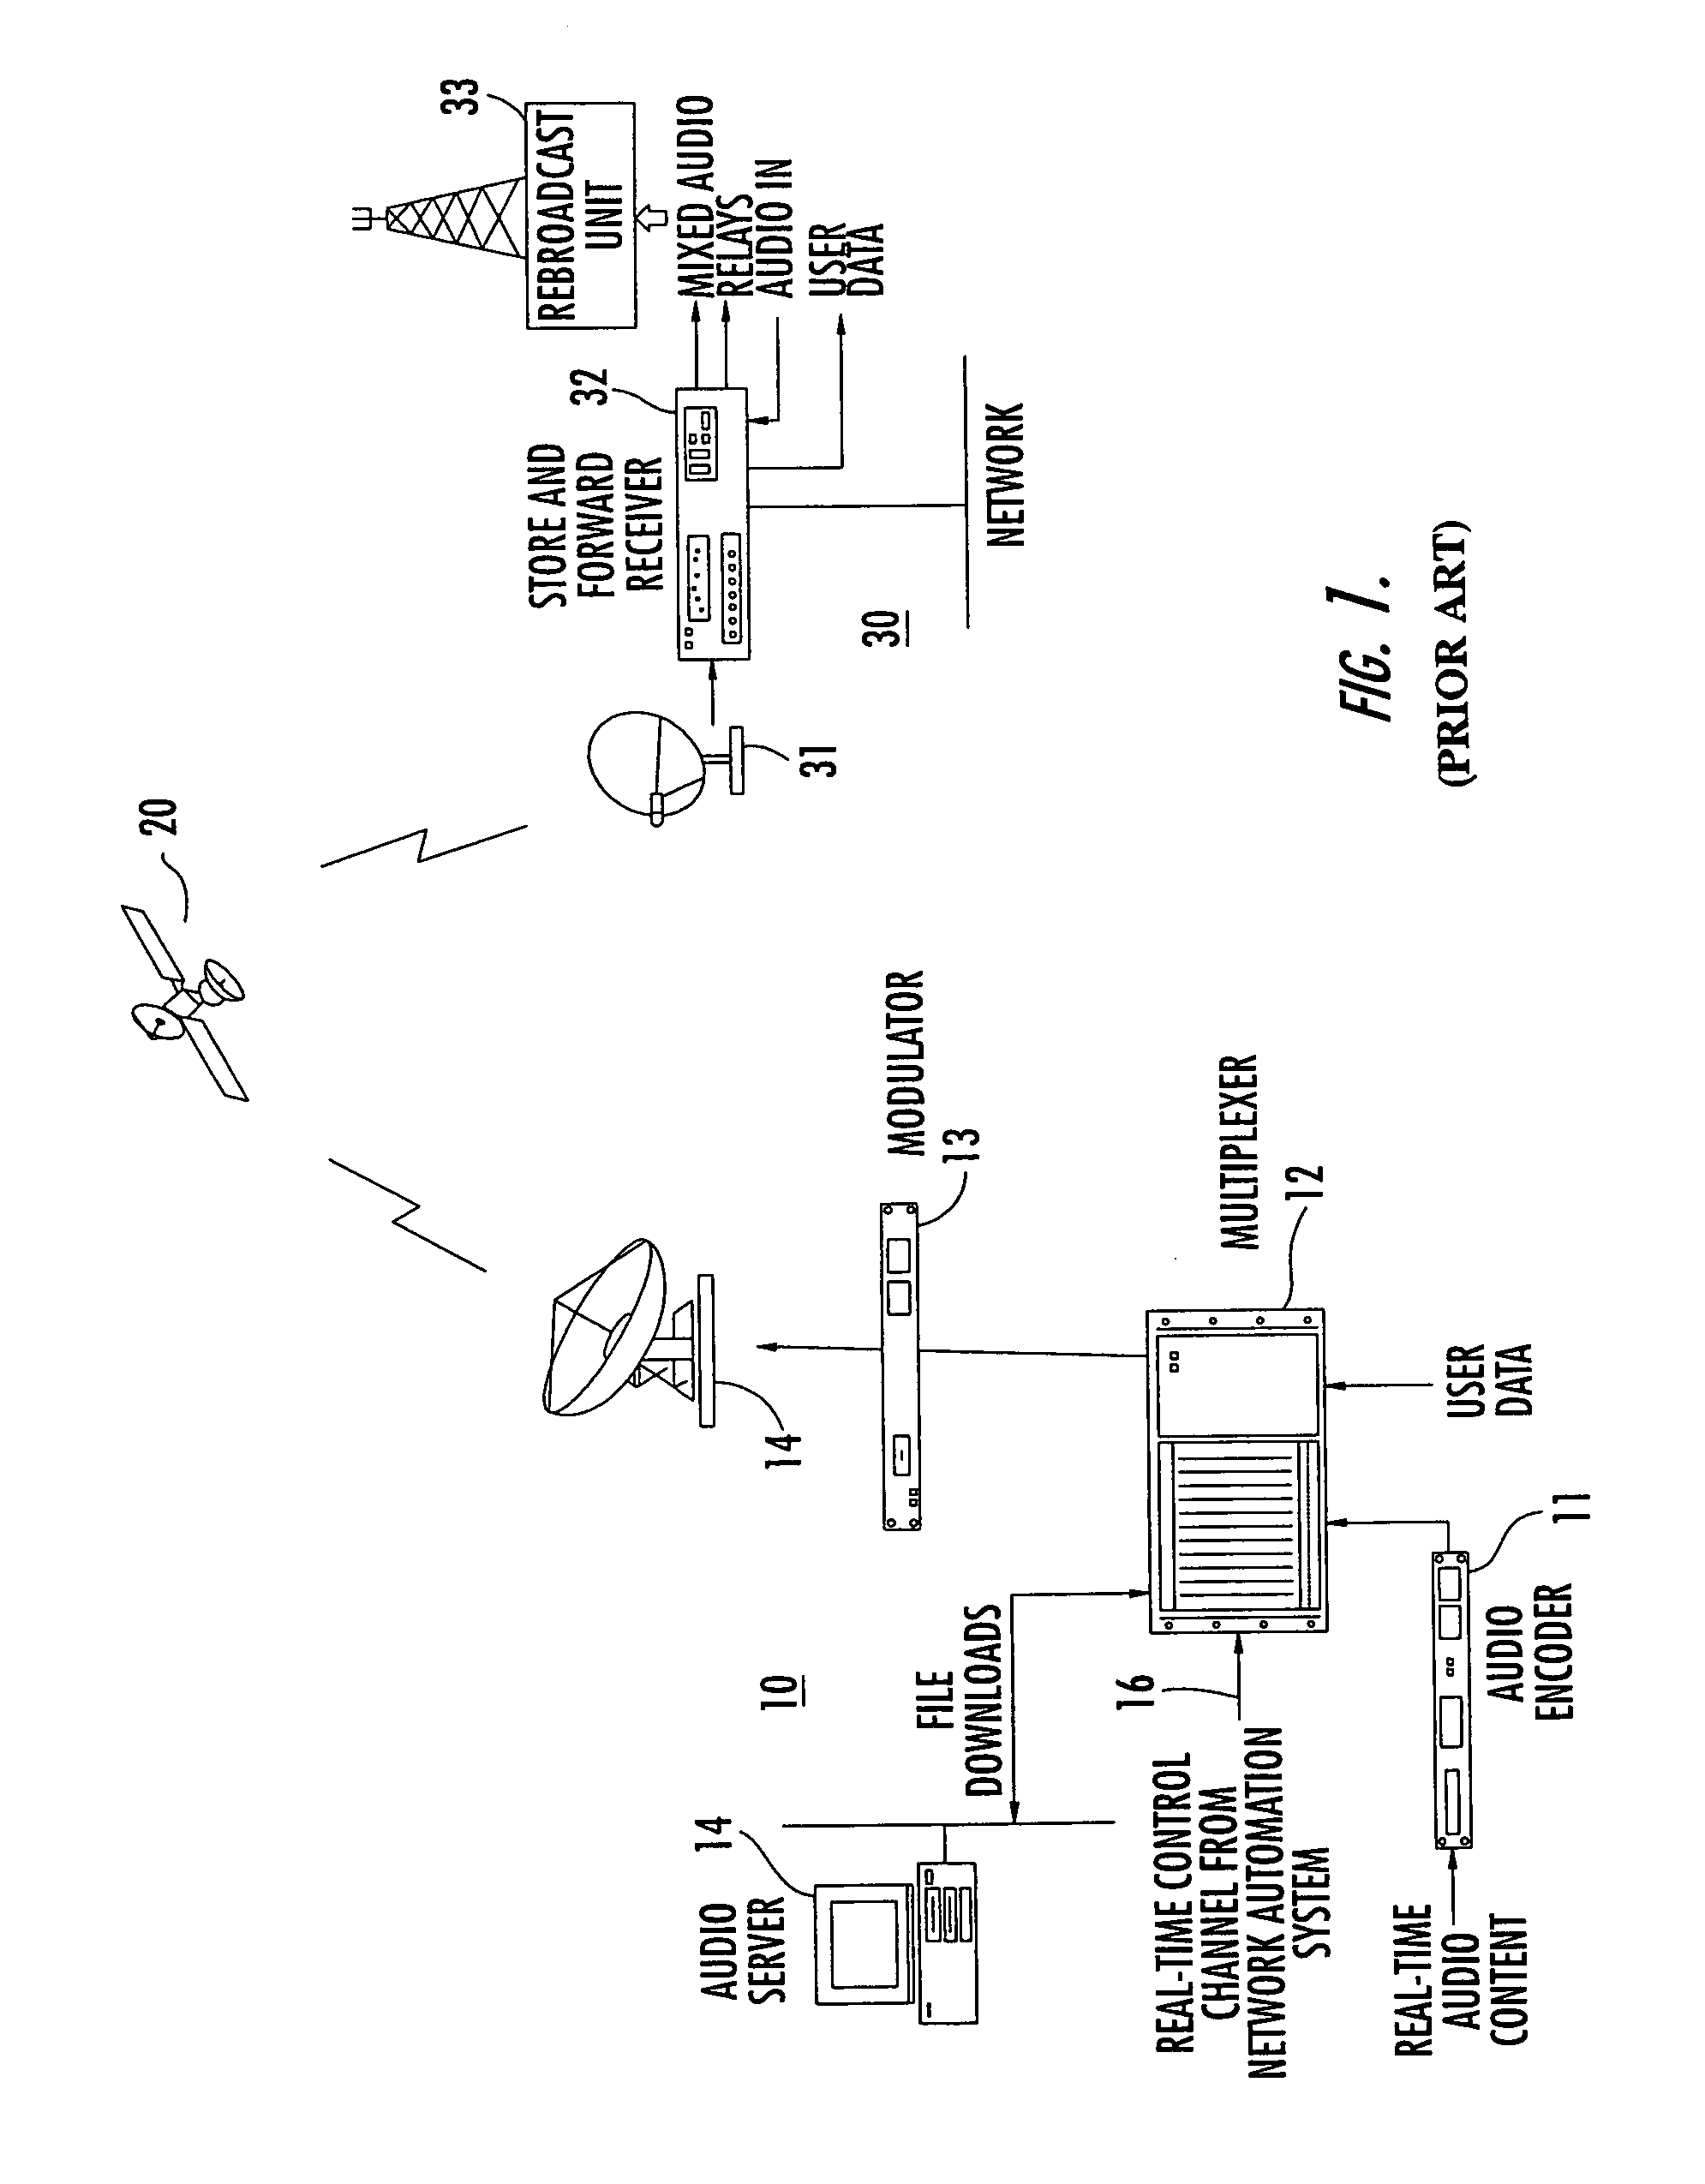 Digital audio store and forward satellite communication receiver employing extensible, multi-threaded command interpreter